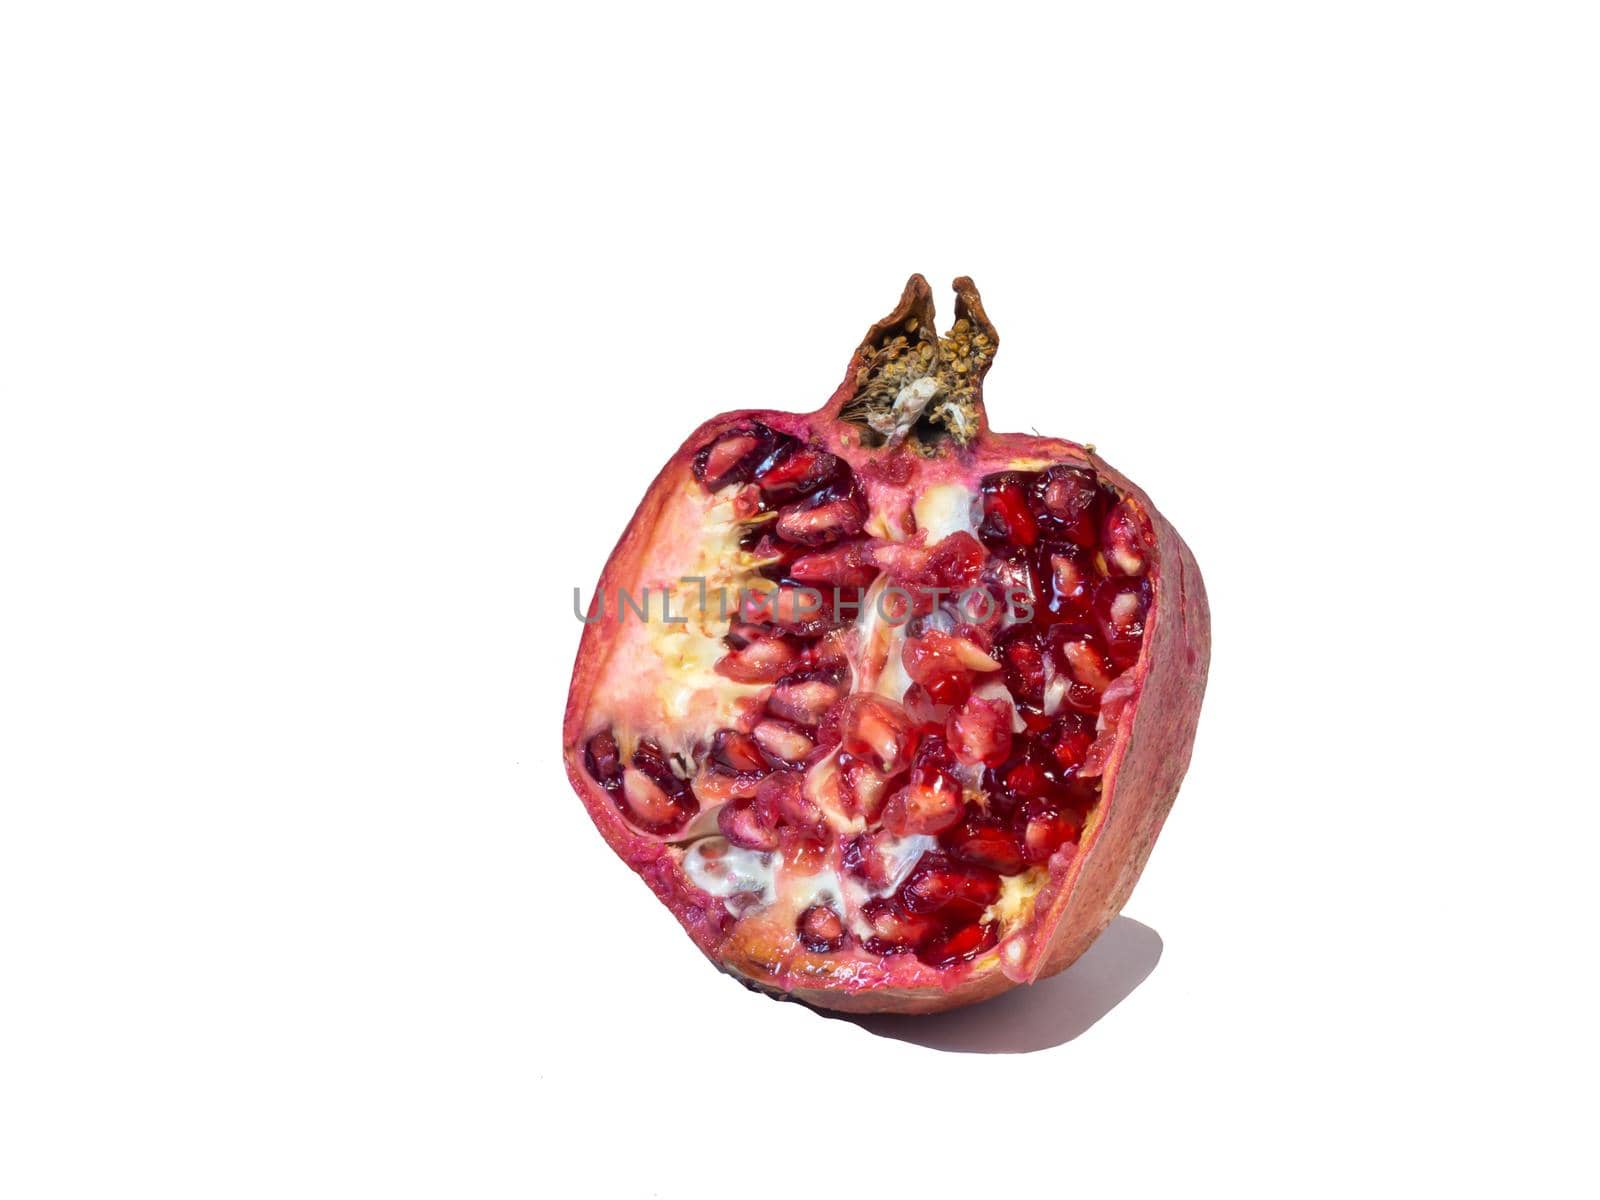 Pomegranate on white background. Useful product by Puludi